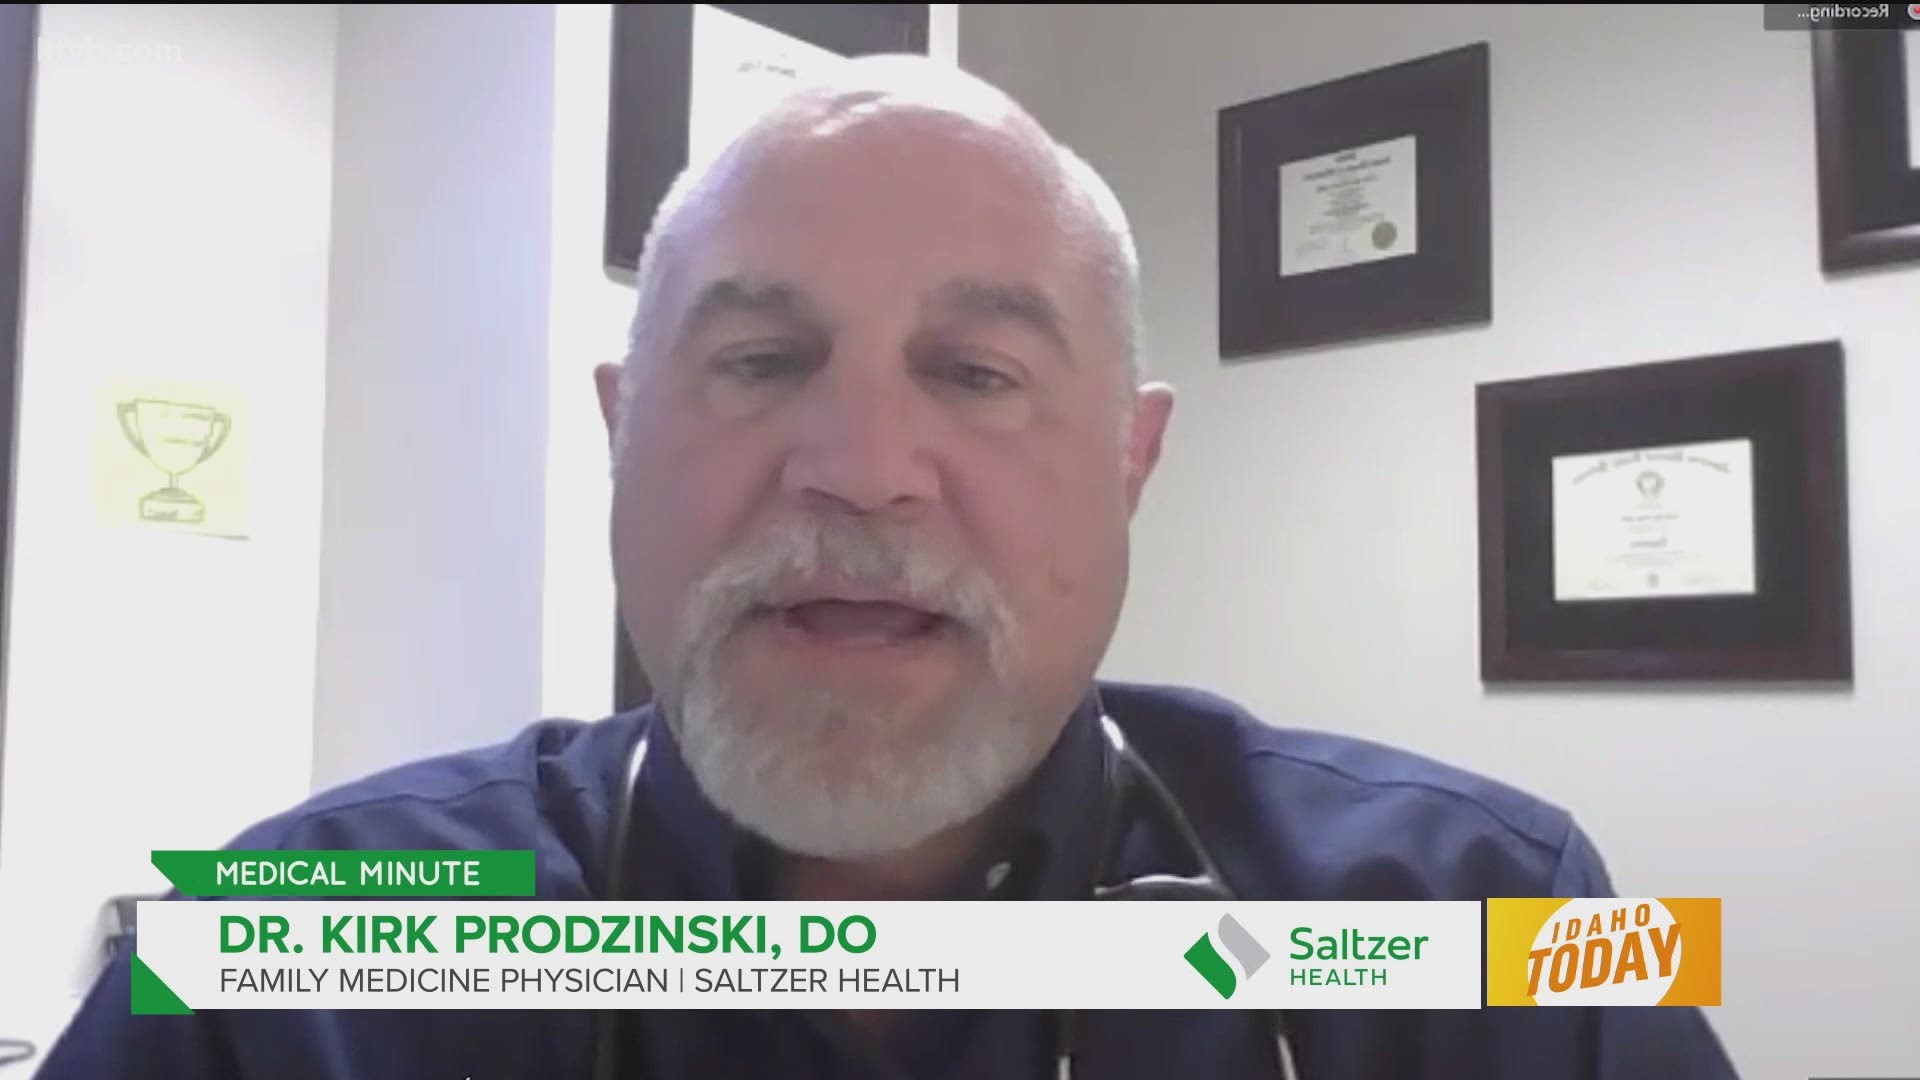 Dr. Kirk Prodzinski with Saltzer Health discusses the importance of Men's Health